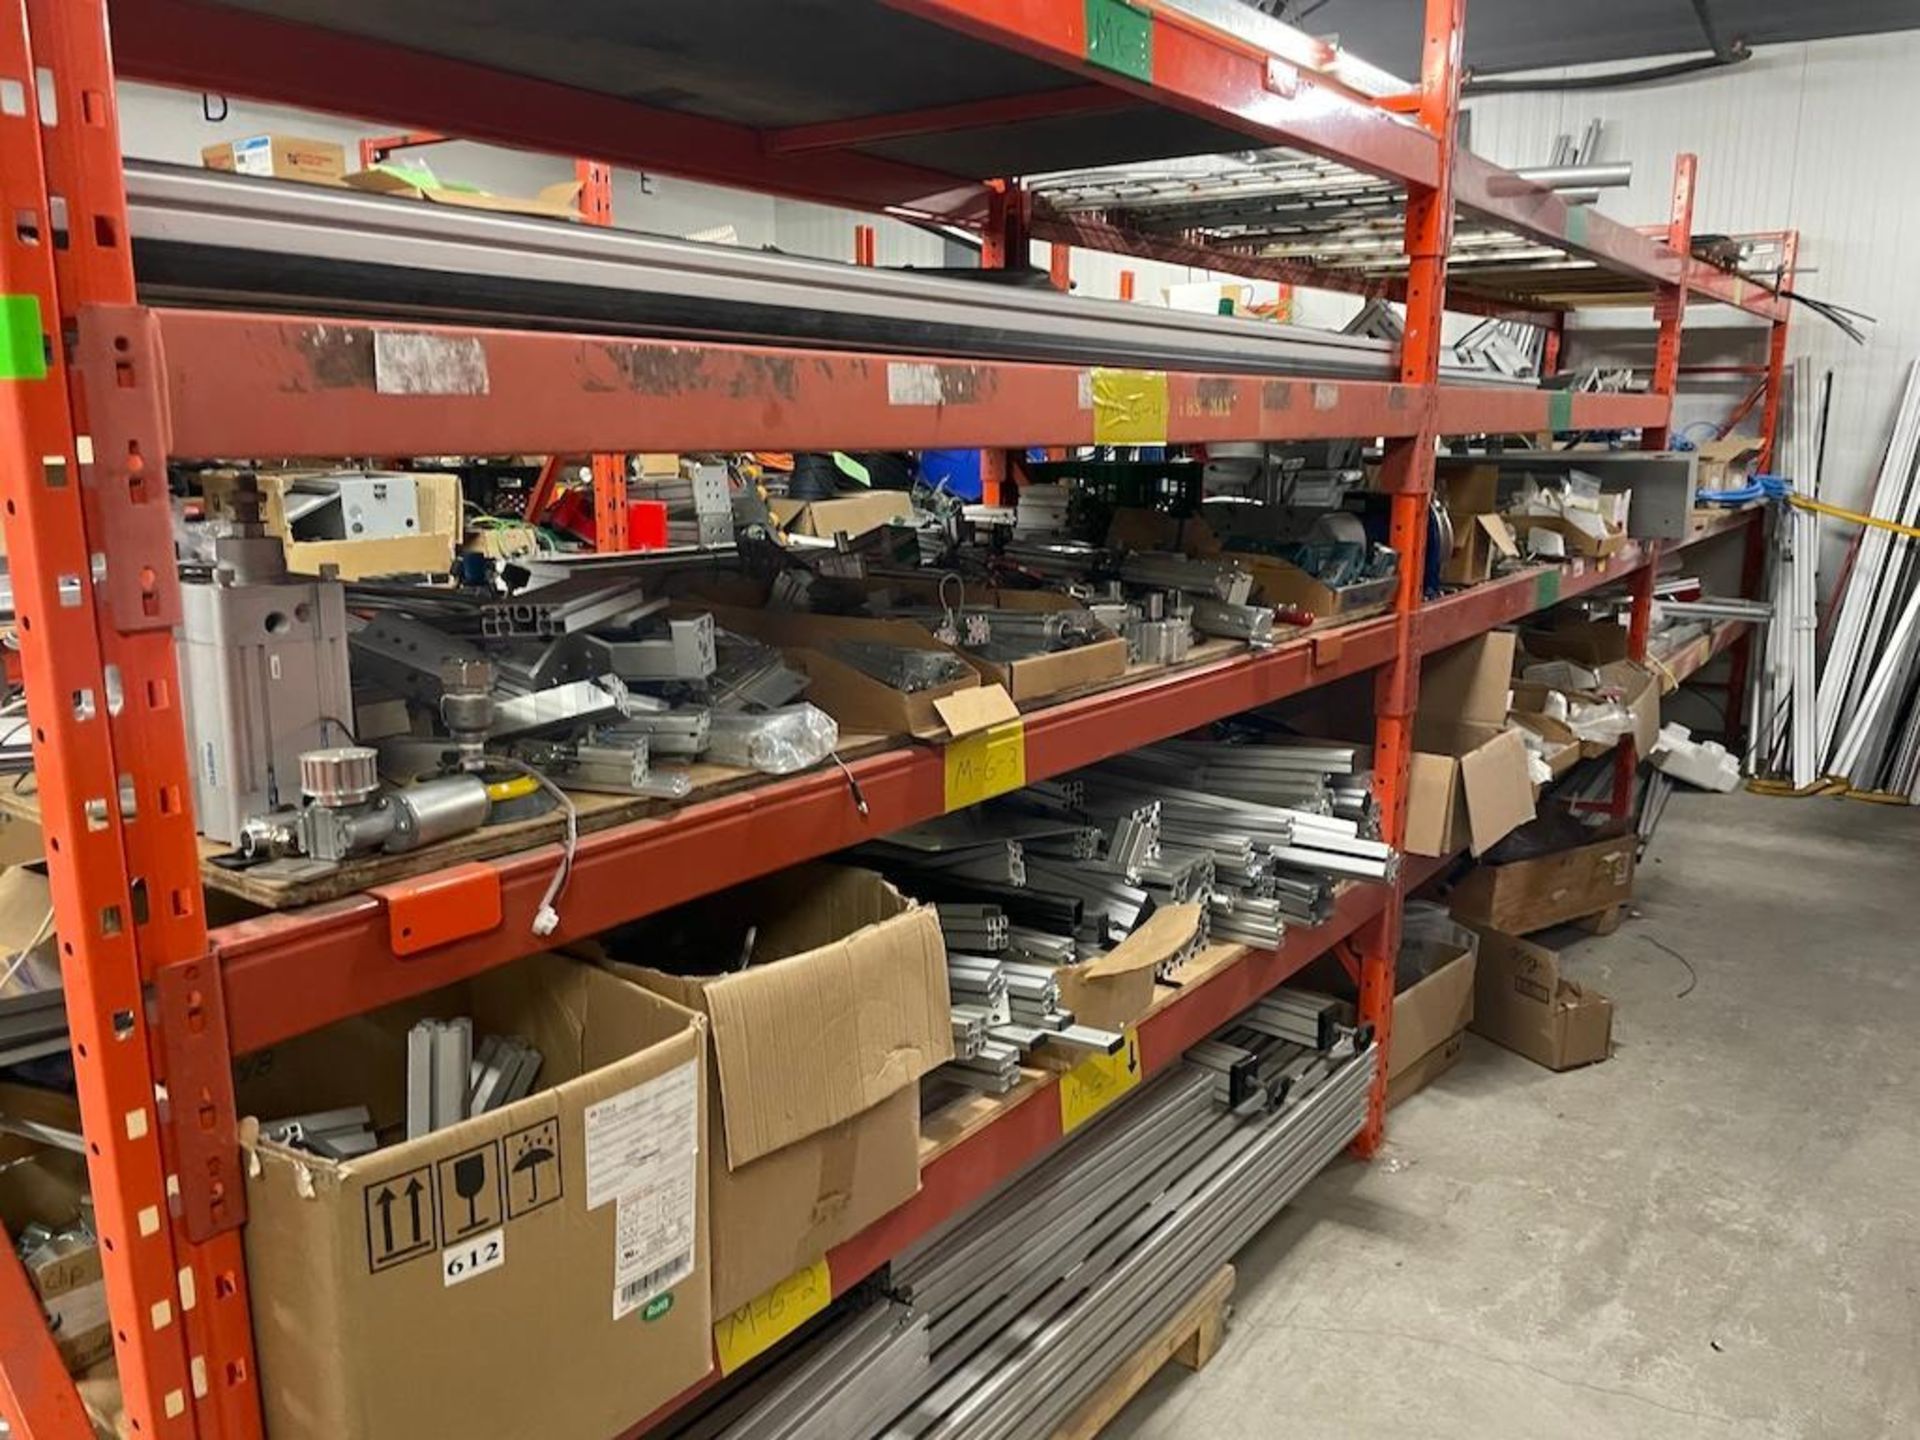 LOT STORES INVENTORY ROOM ON SECOND LEVEL, INCLUDING ALL PARTS, WIRING, FRAMING, CONTROL BOXES, 15 S - Image 11 of 16